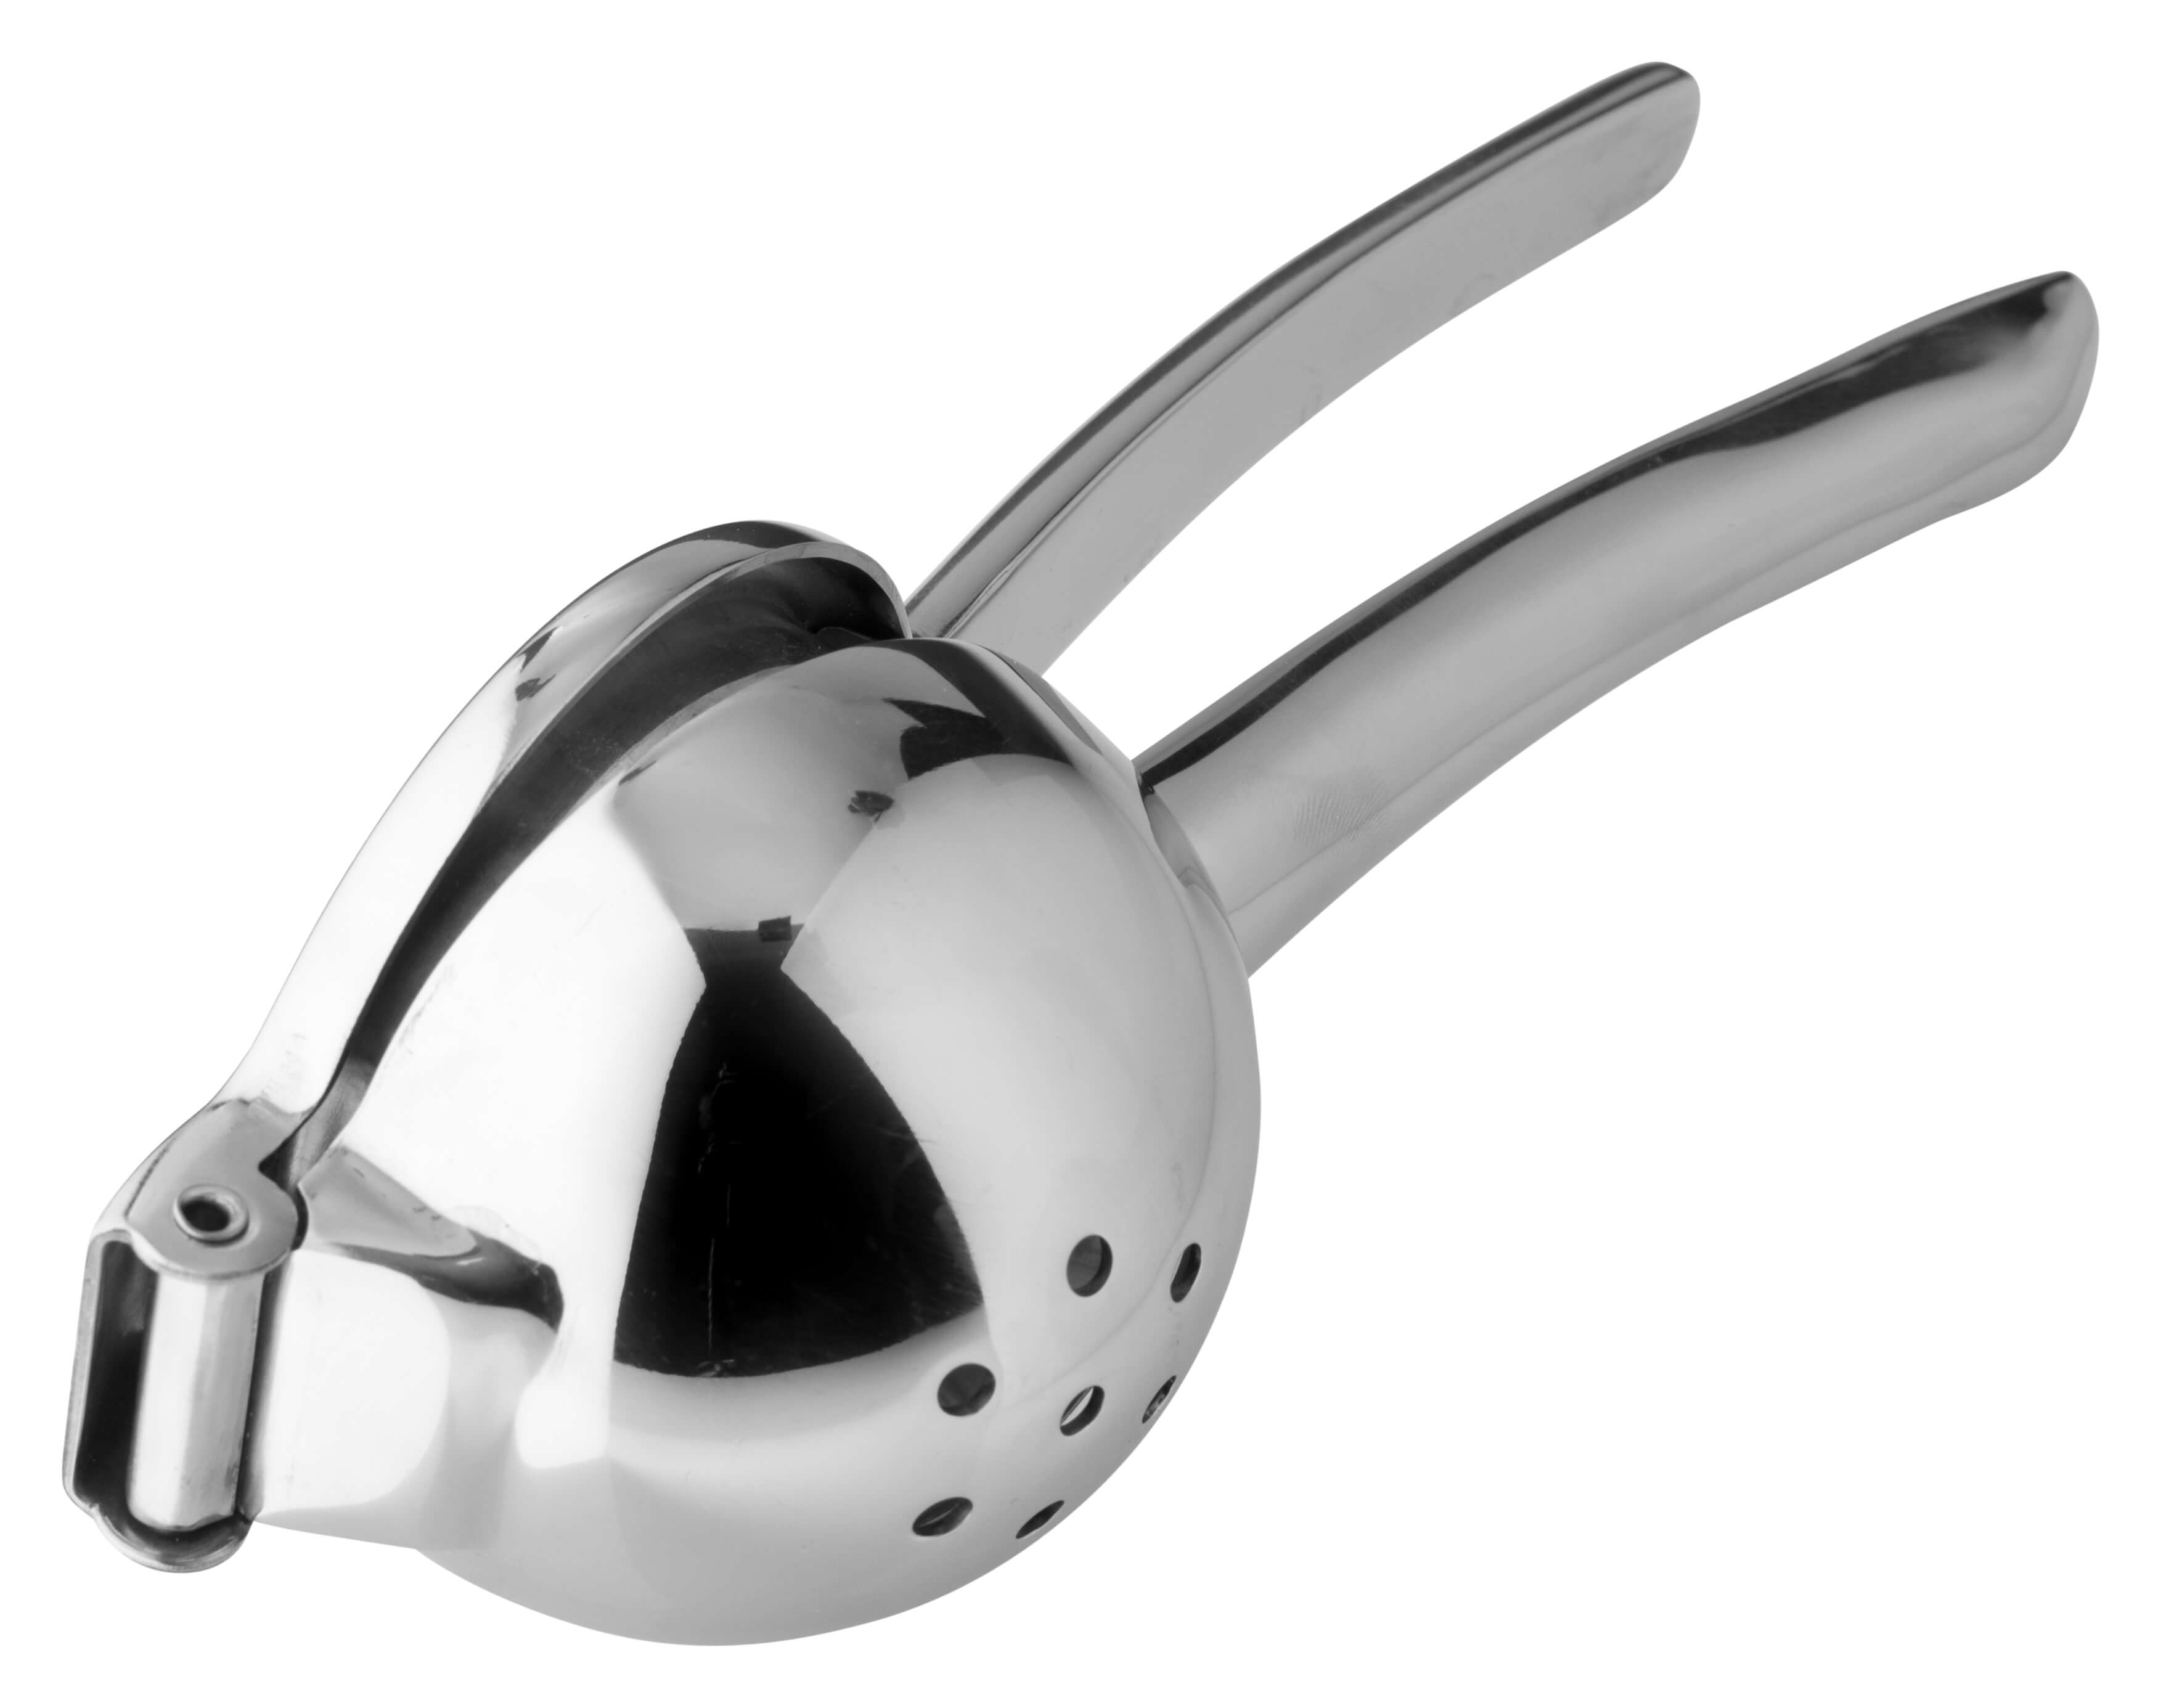 Lime and lemon squeezer, Prime Bar - stainless steel